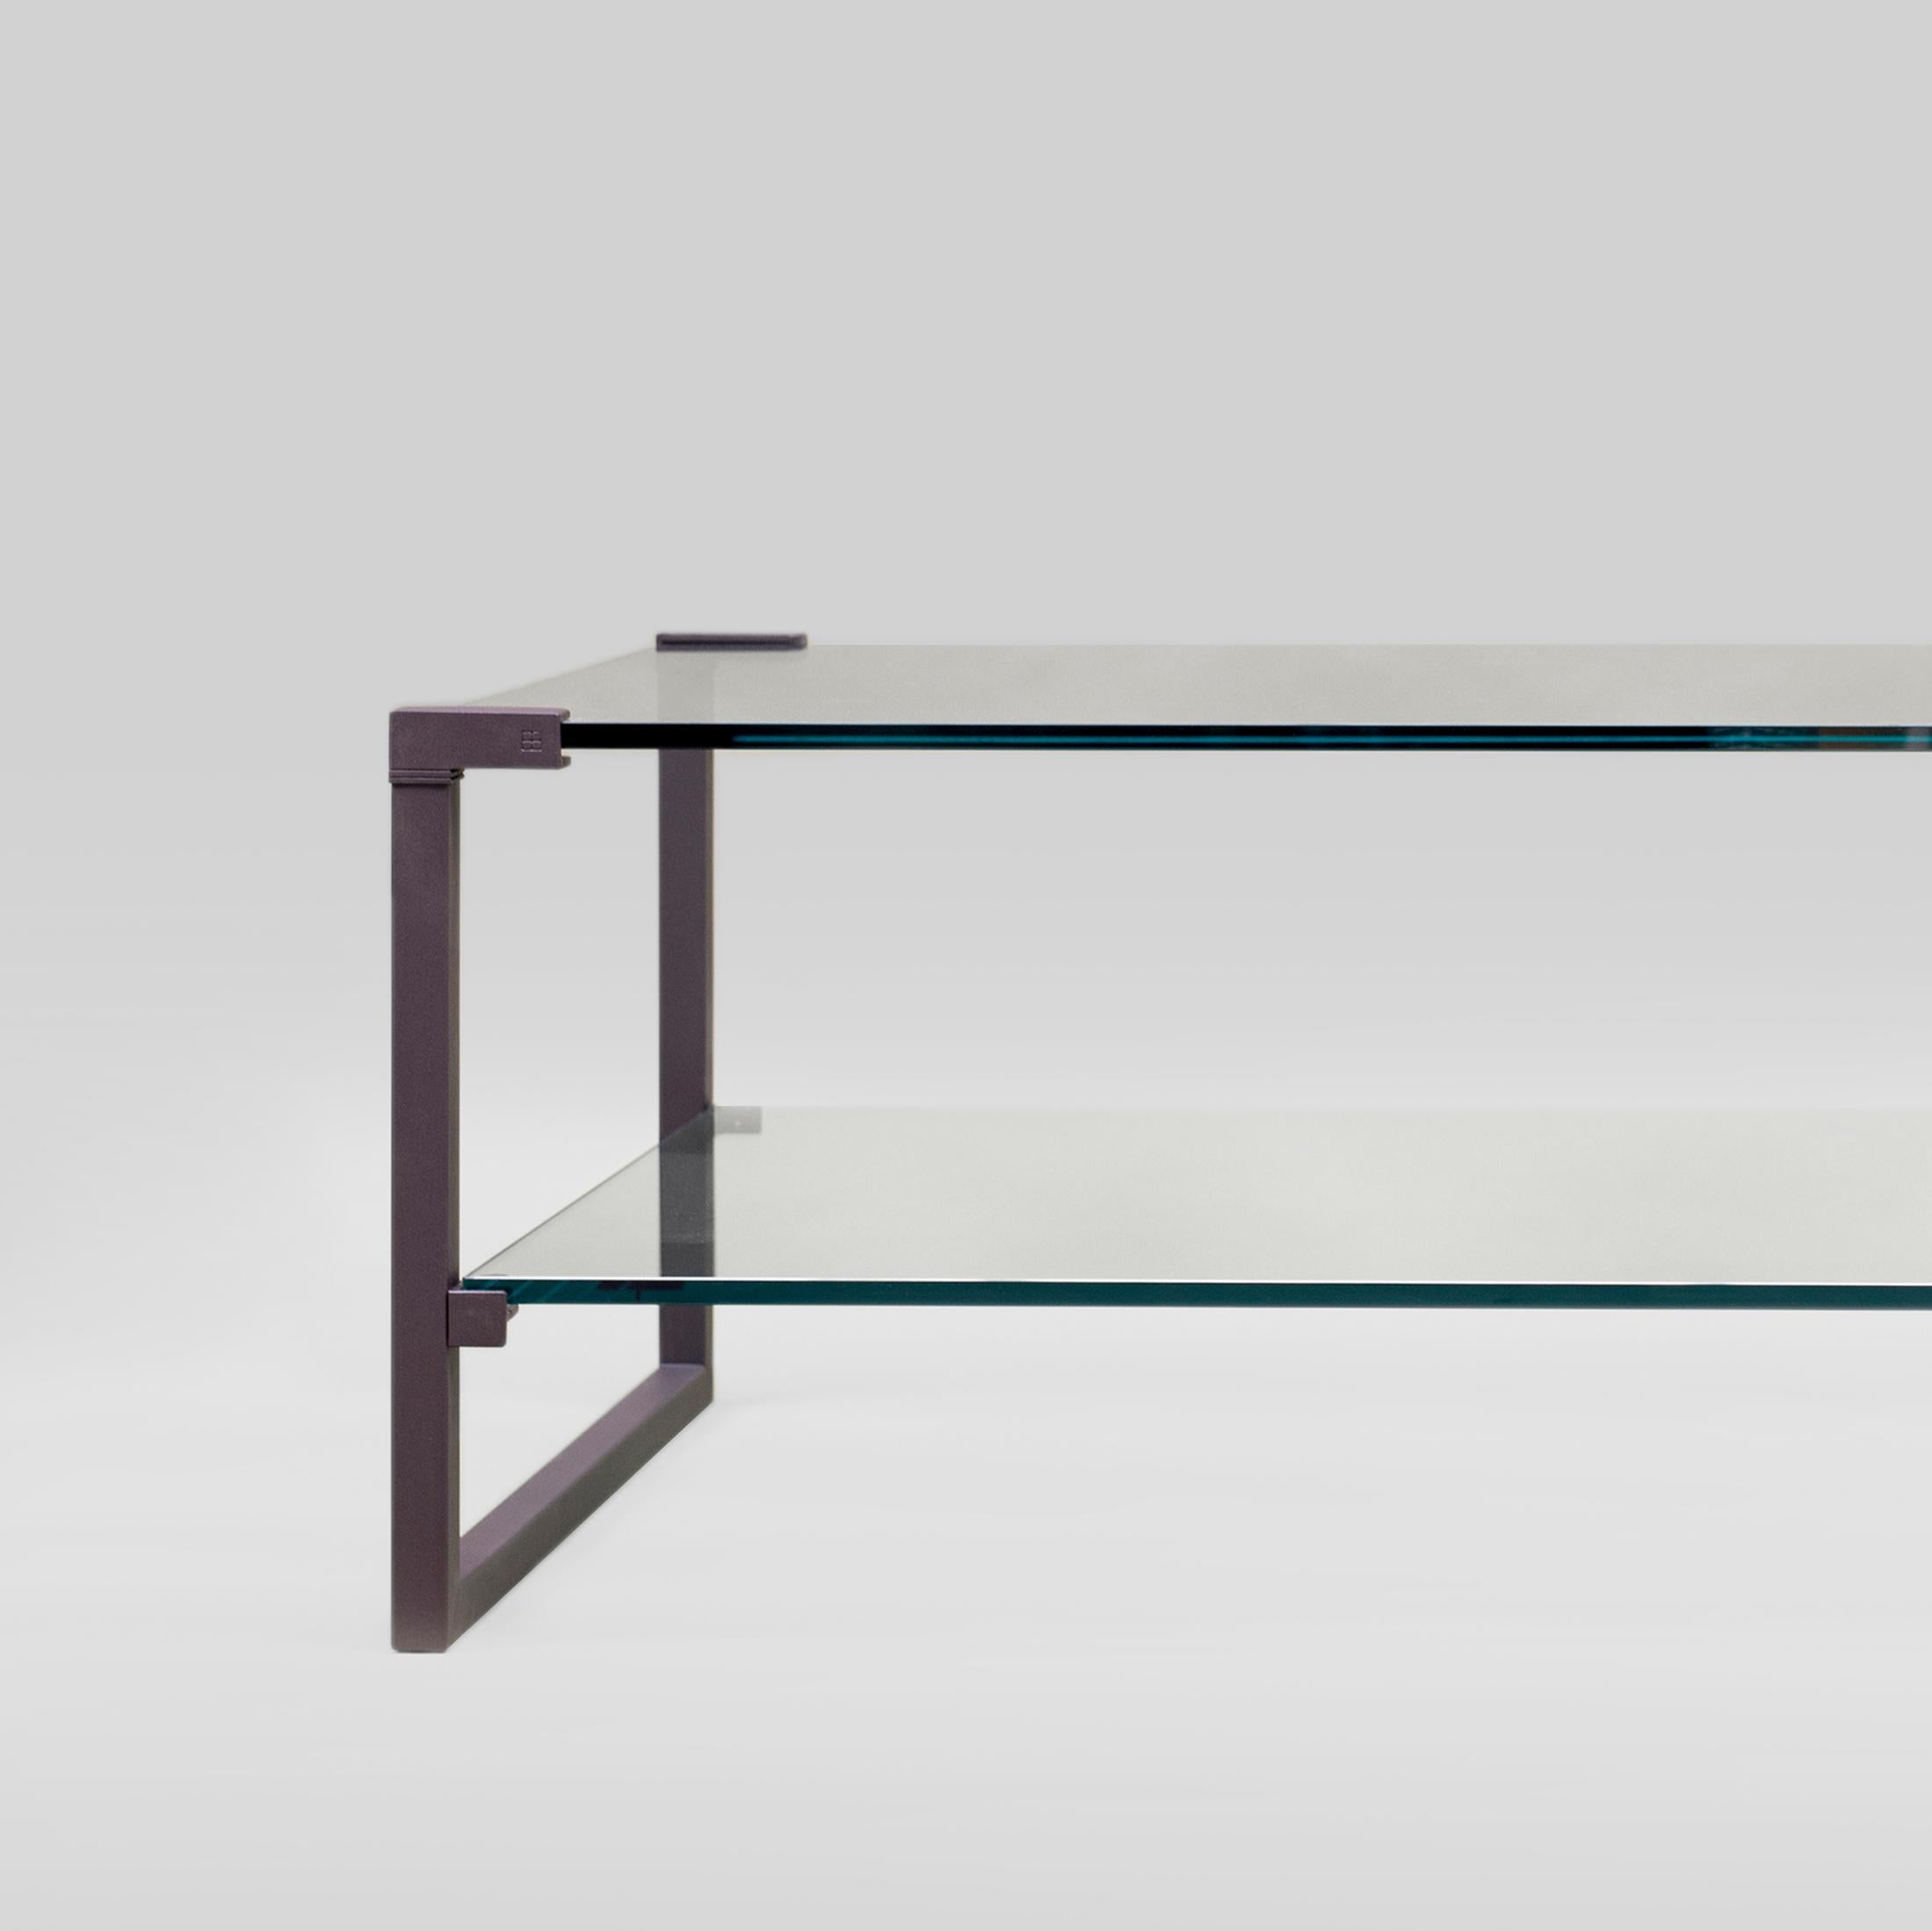 Table designed by Peter Ghyczy.
Manufactured by Ghyczy (Netherlands)

The twin frames are constructed of 3 × 3 square tubes and secured to the tabletop by cast metal details. The strong construction makes this table versatile, fitting every interior